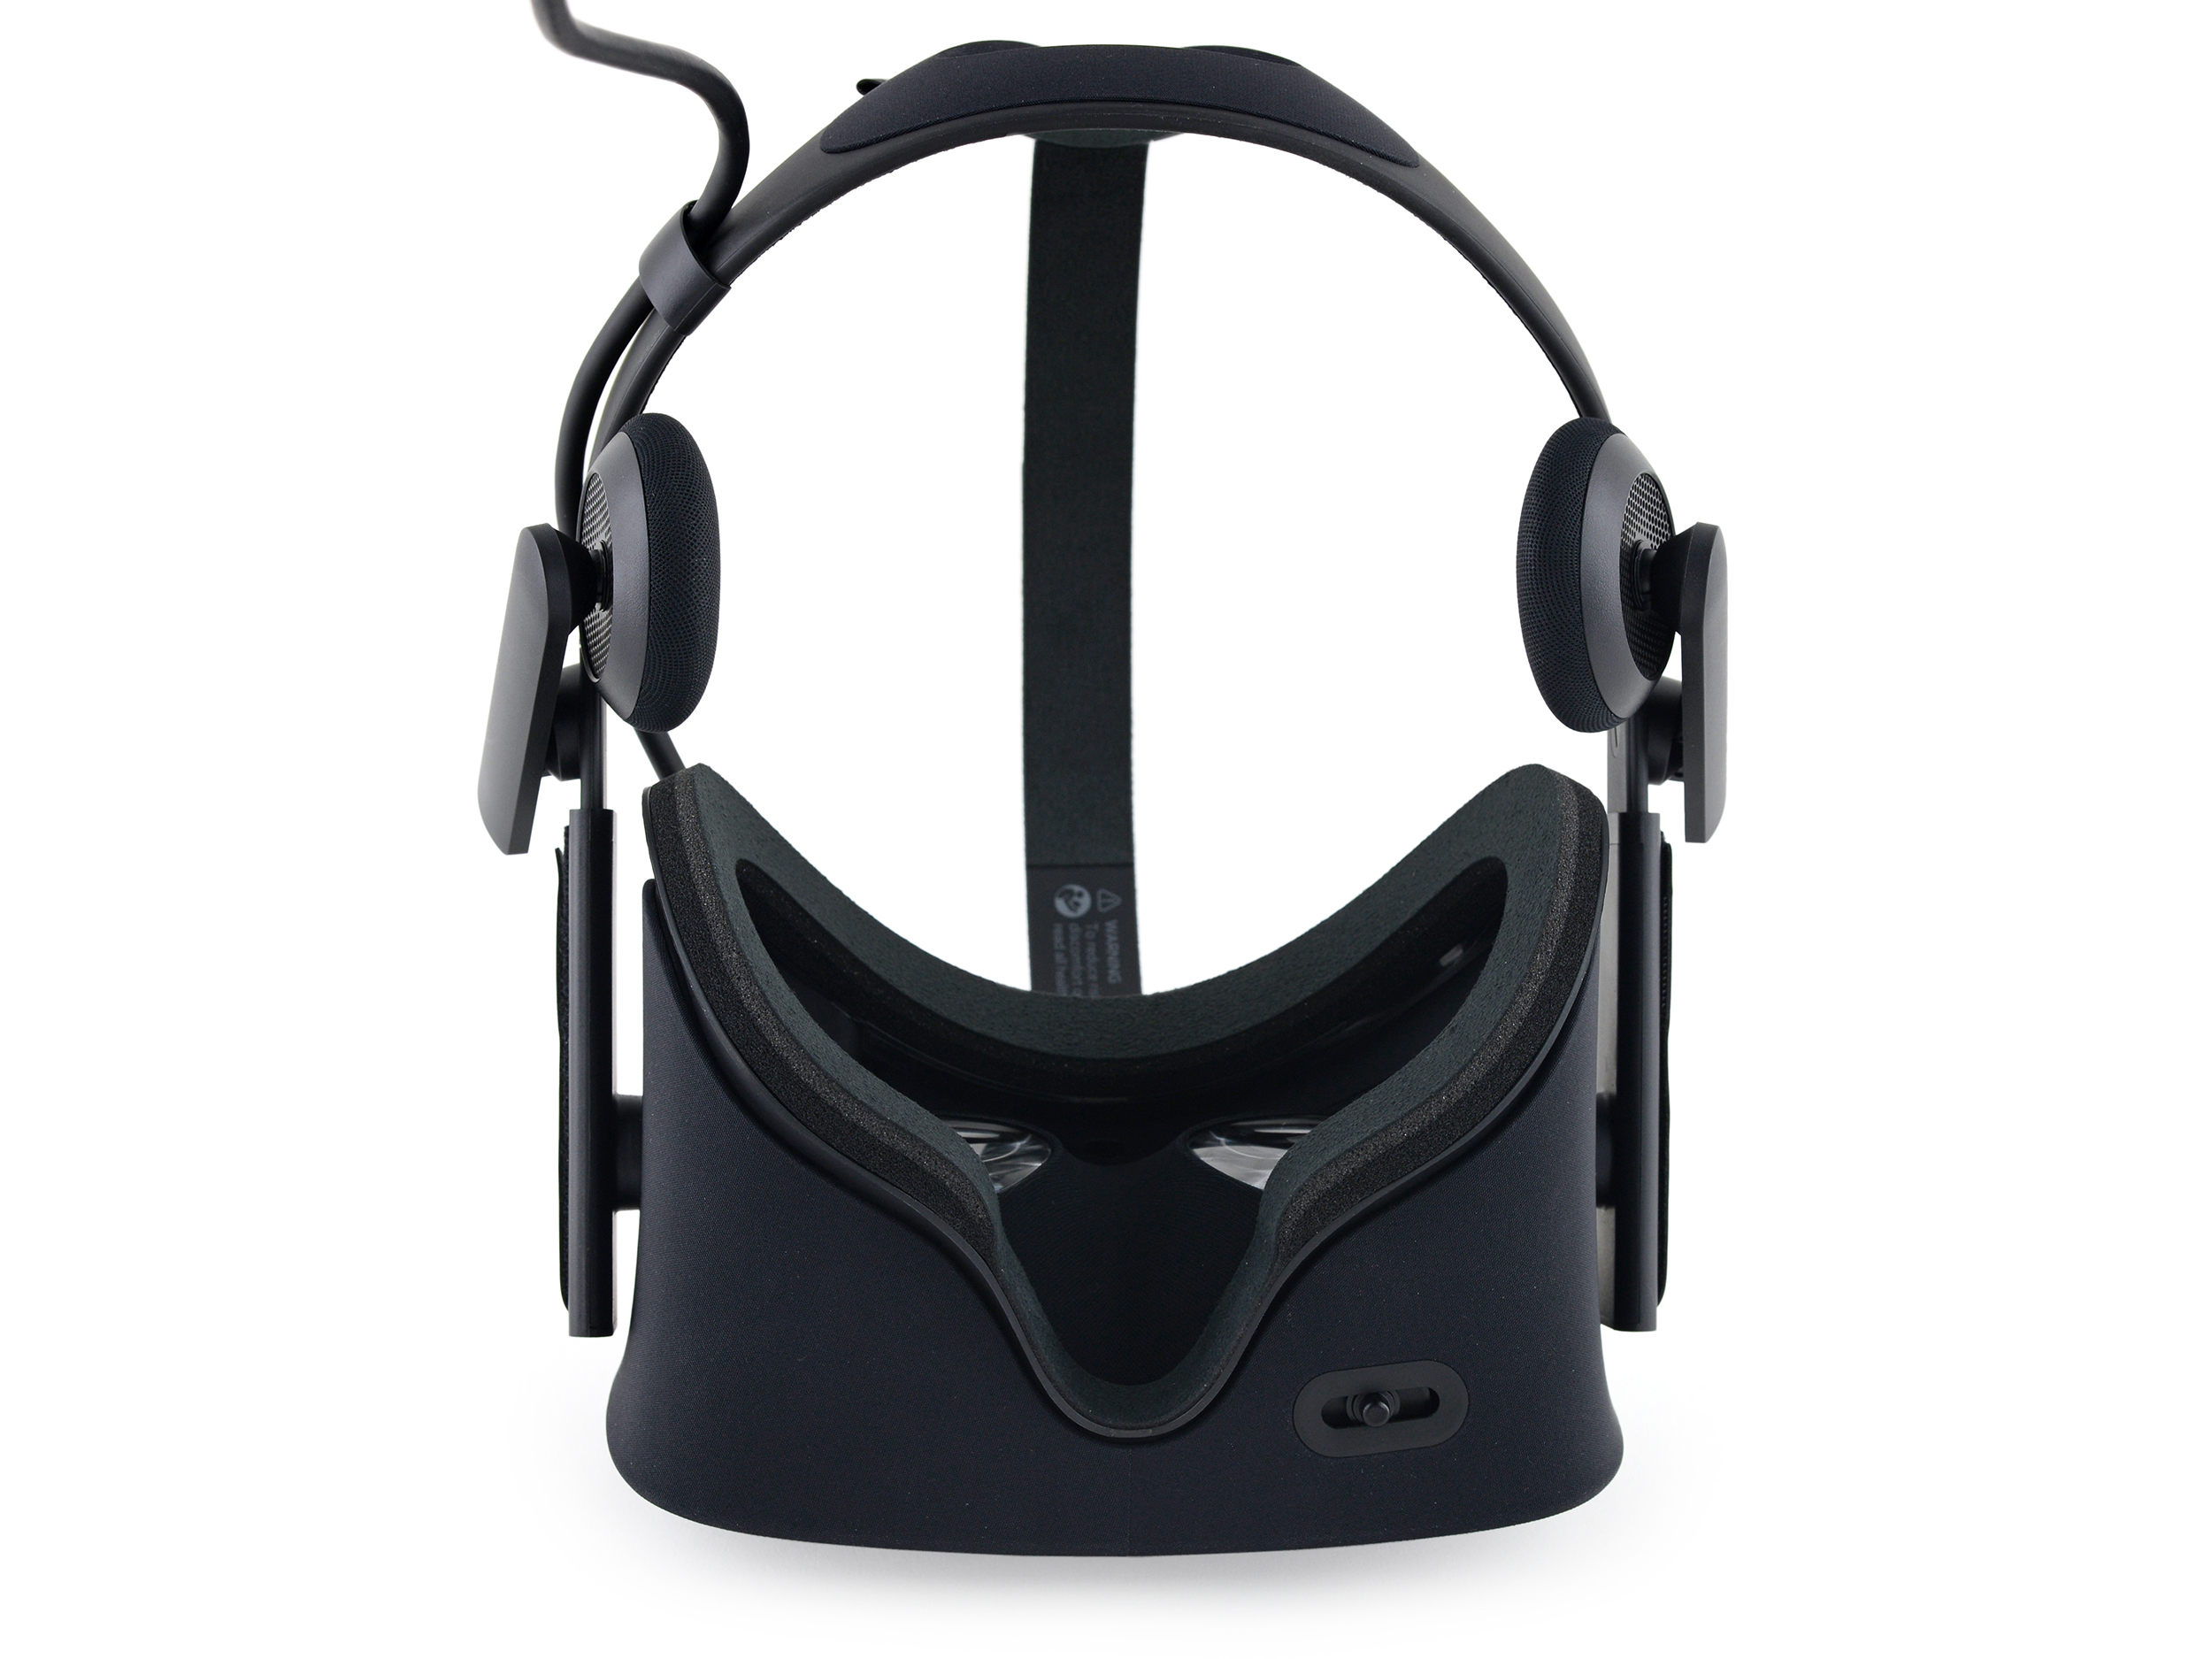 The Oculus Rift is lined with foam padding to make it comfortable to wear.